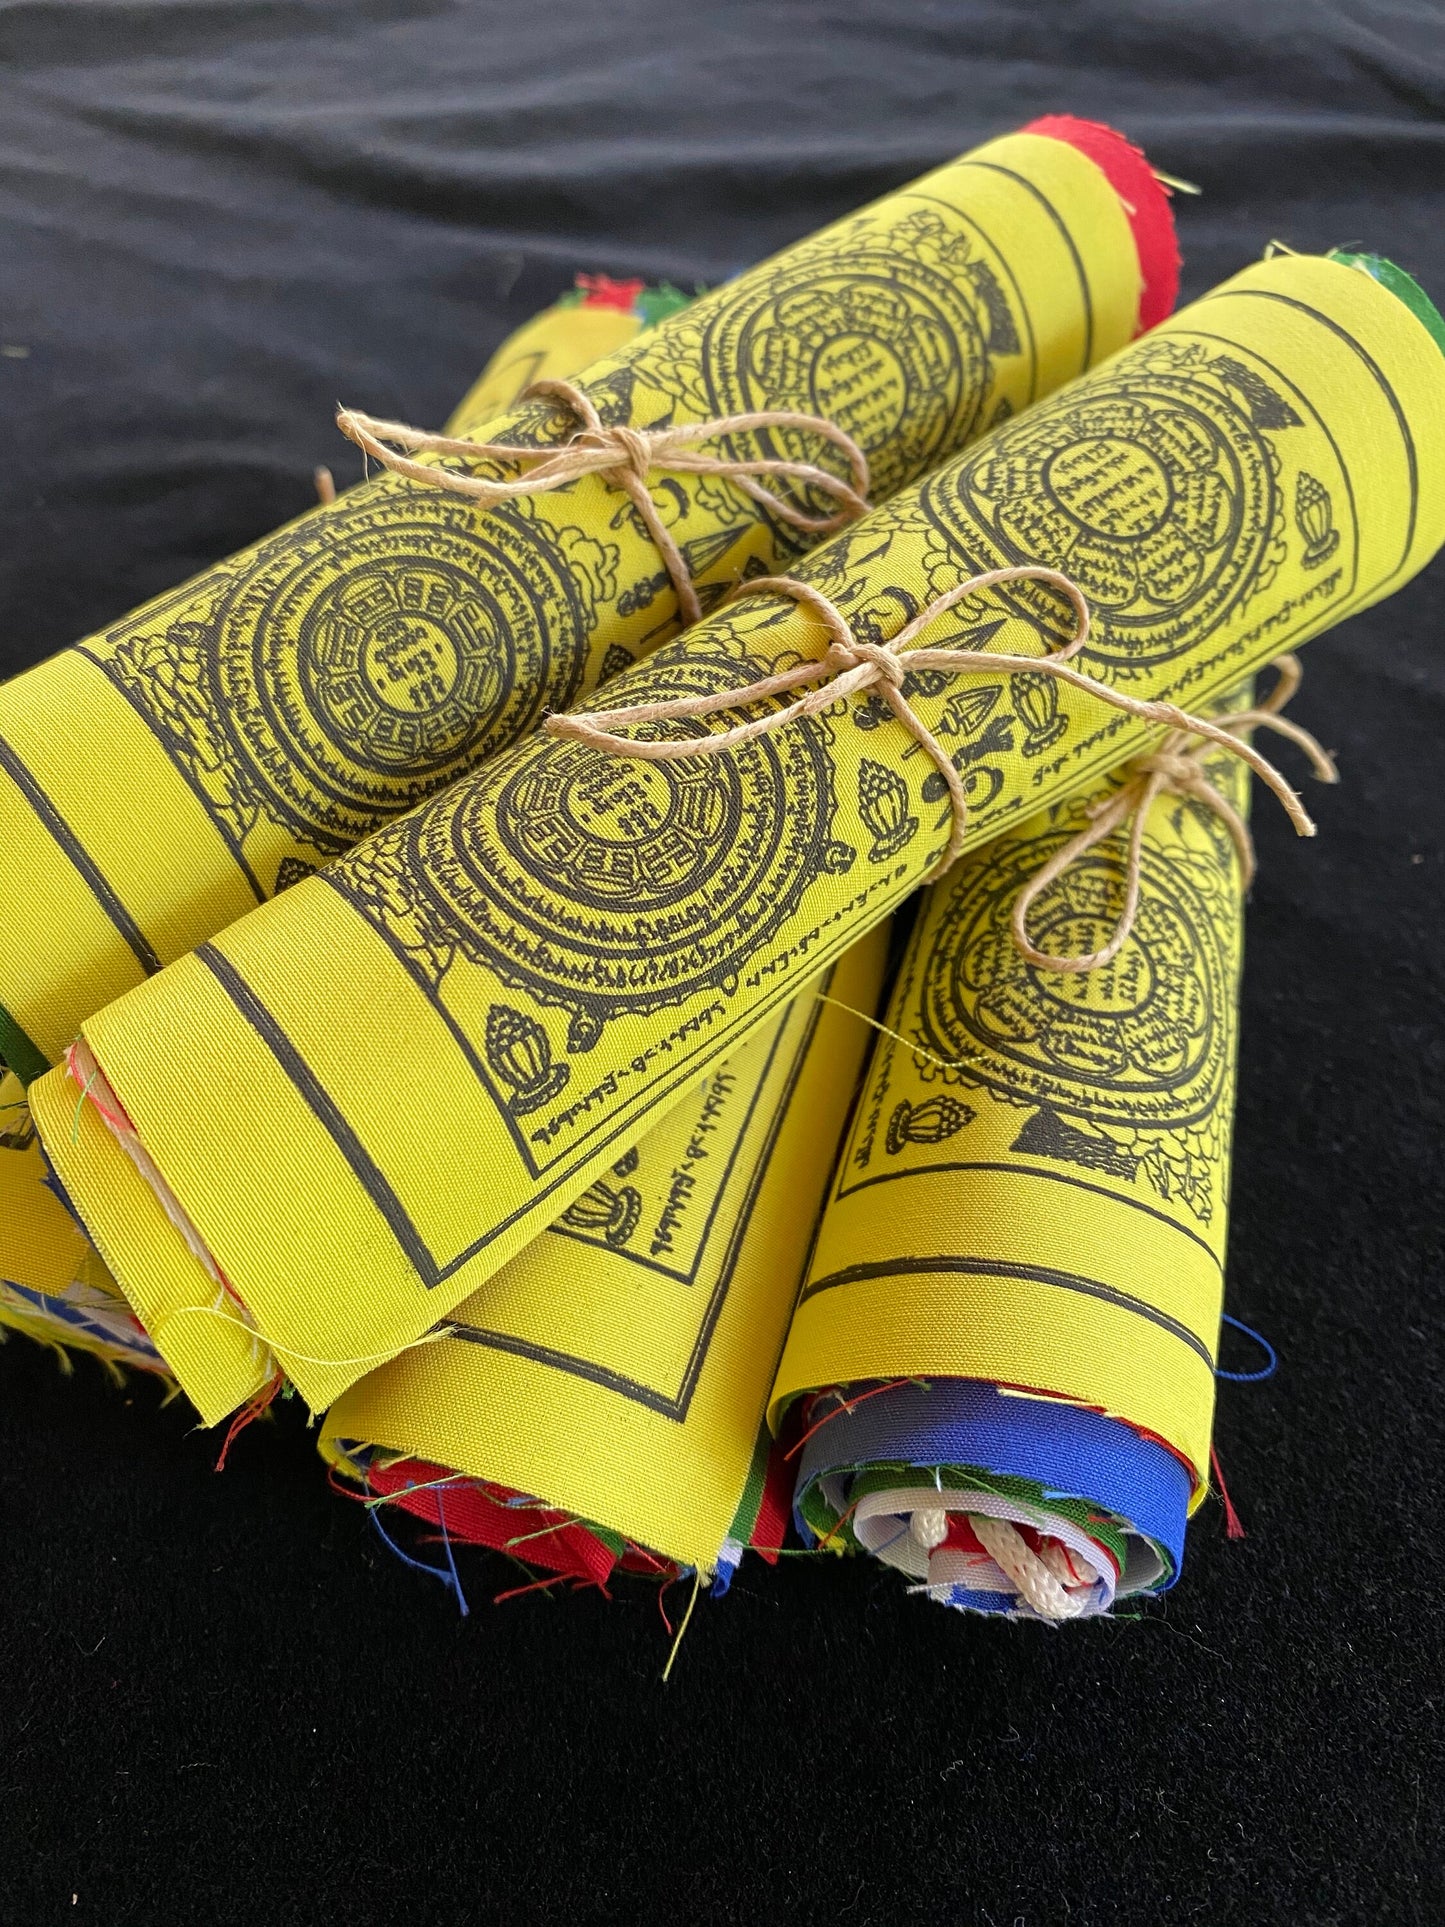 5 rolls of of 6x7.5 inch Wheel of life prayer flags in 5 colors stacked against a black background